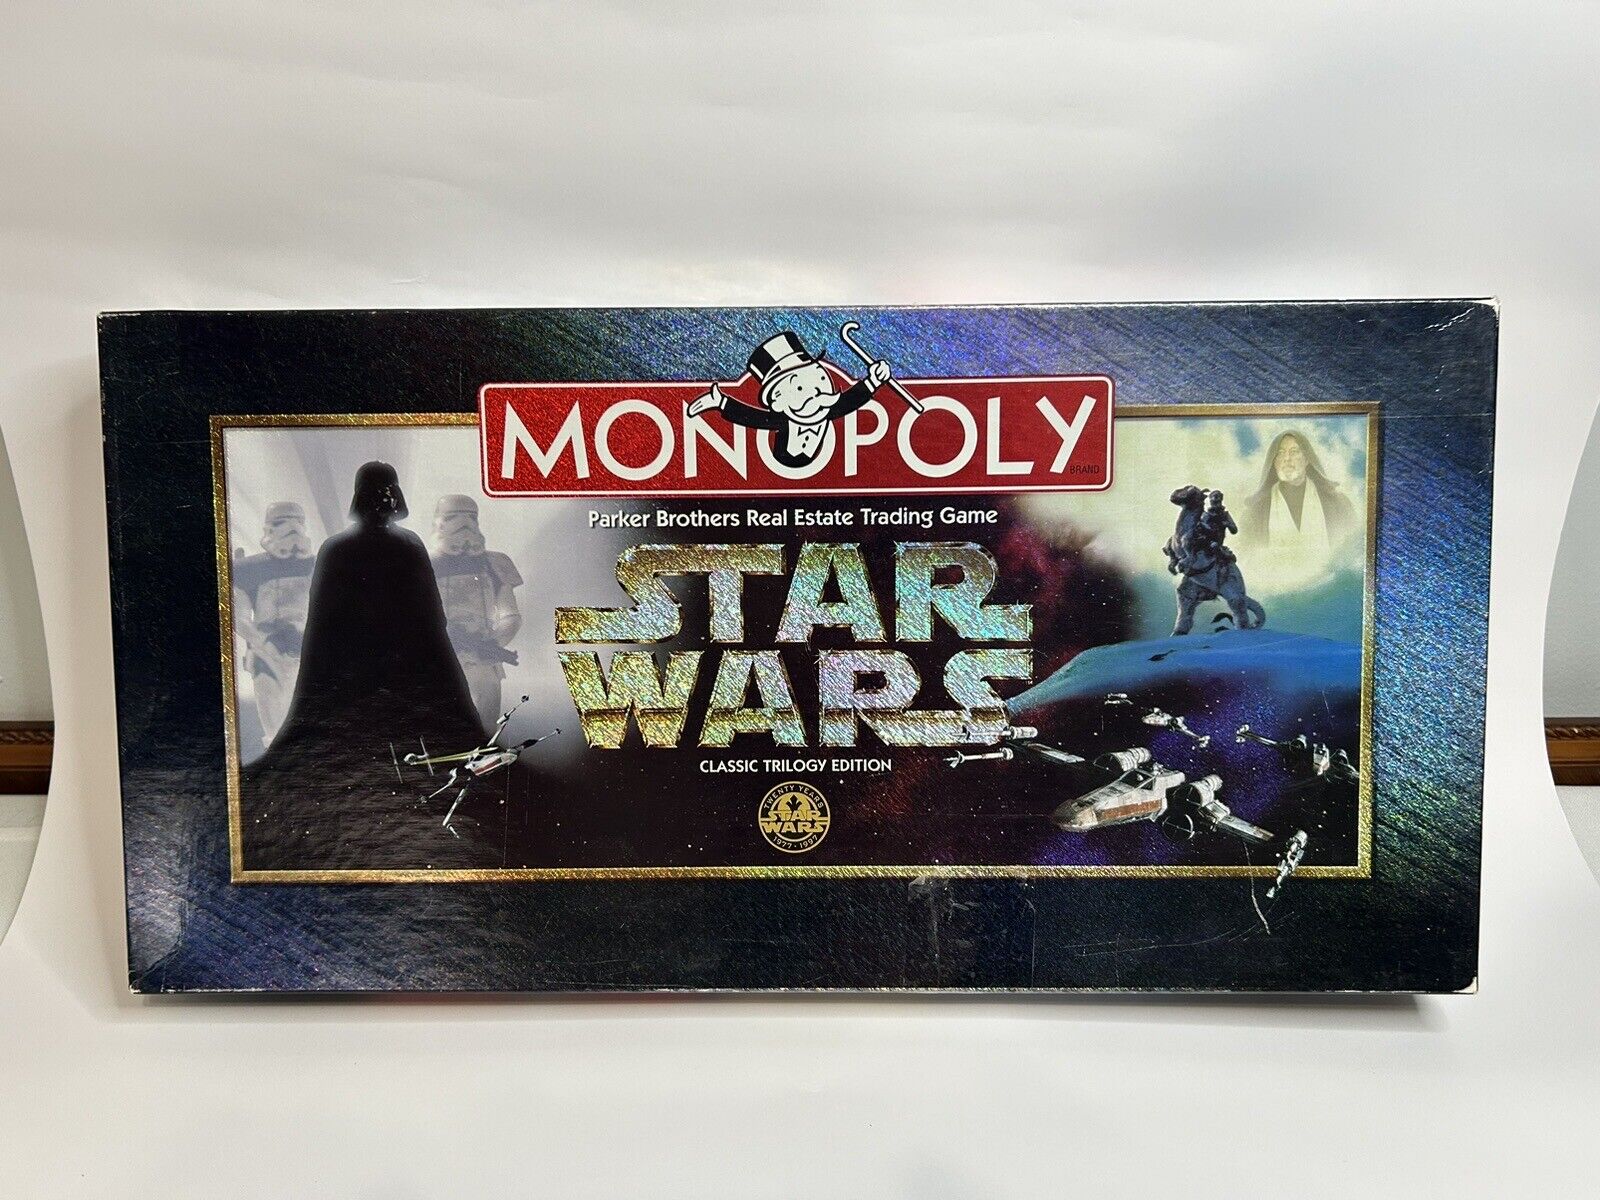 Star Wars Classic Trilogy Edition 1997 Monopoly Game   Complete  